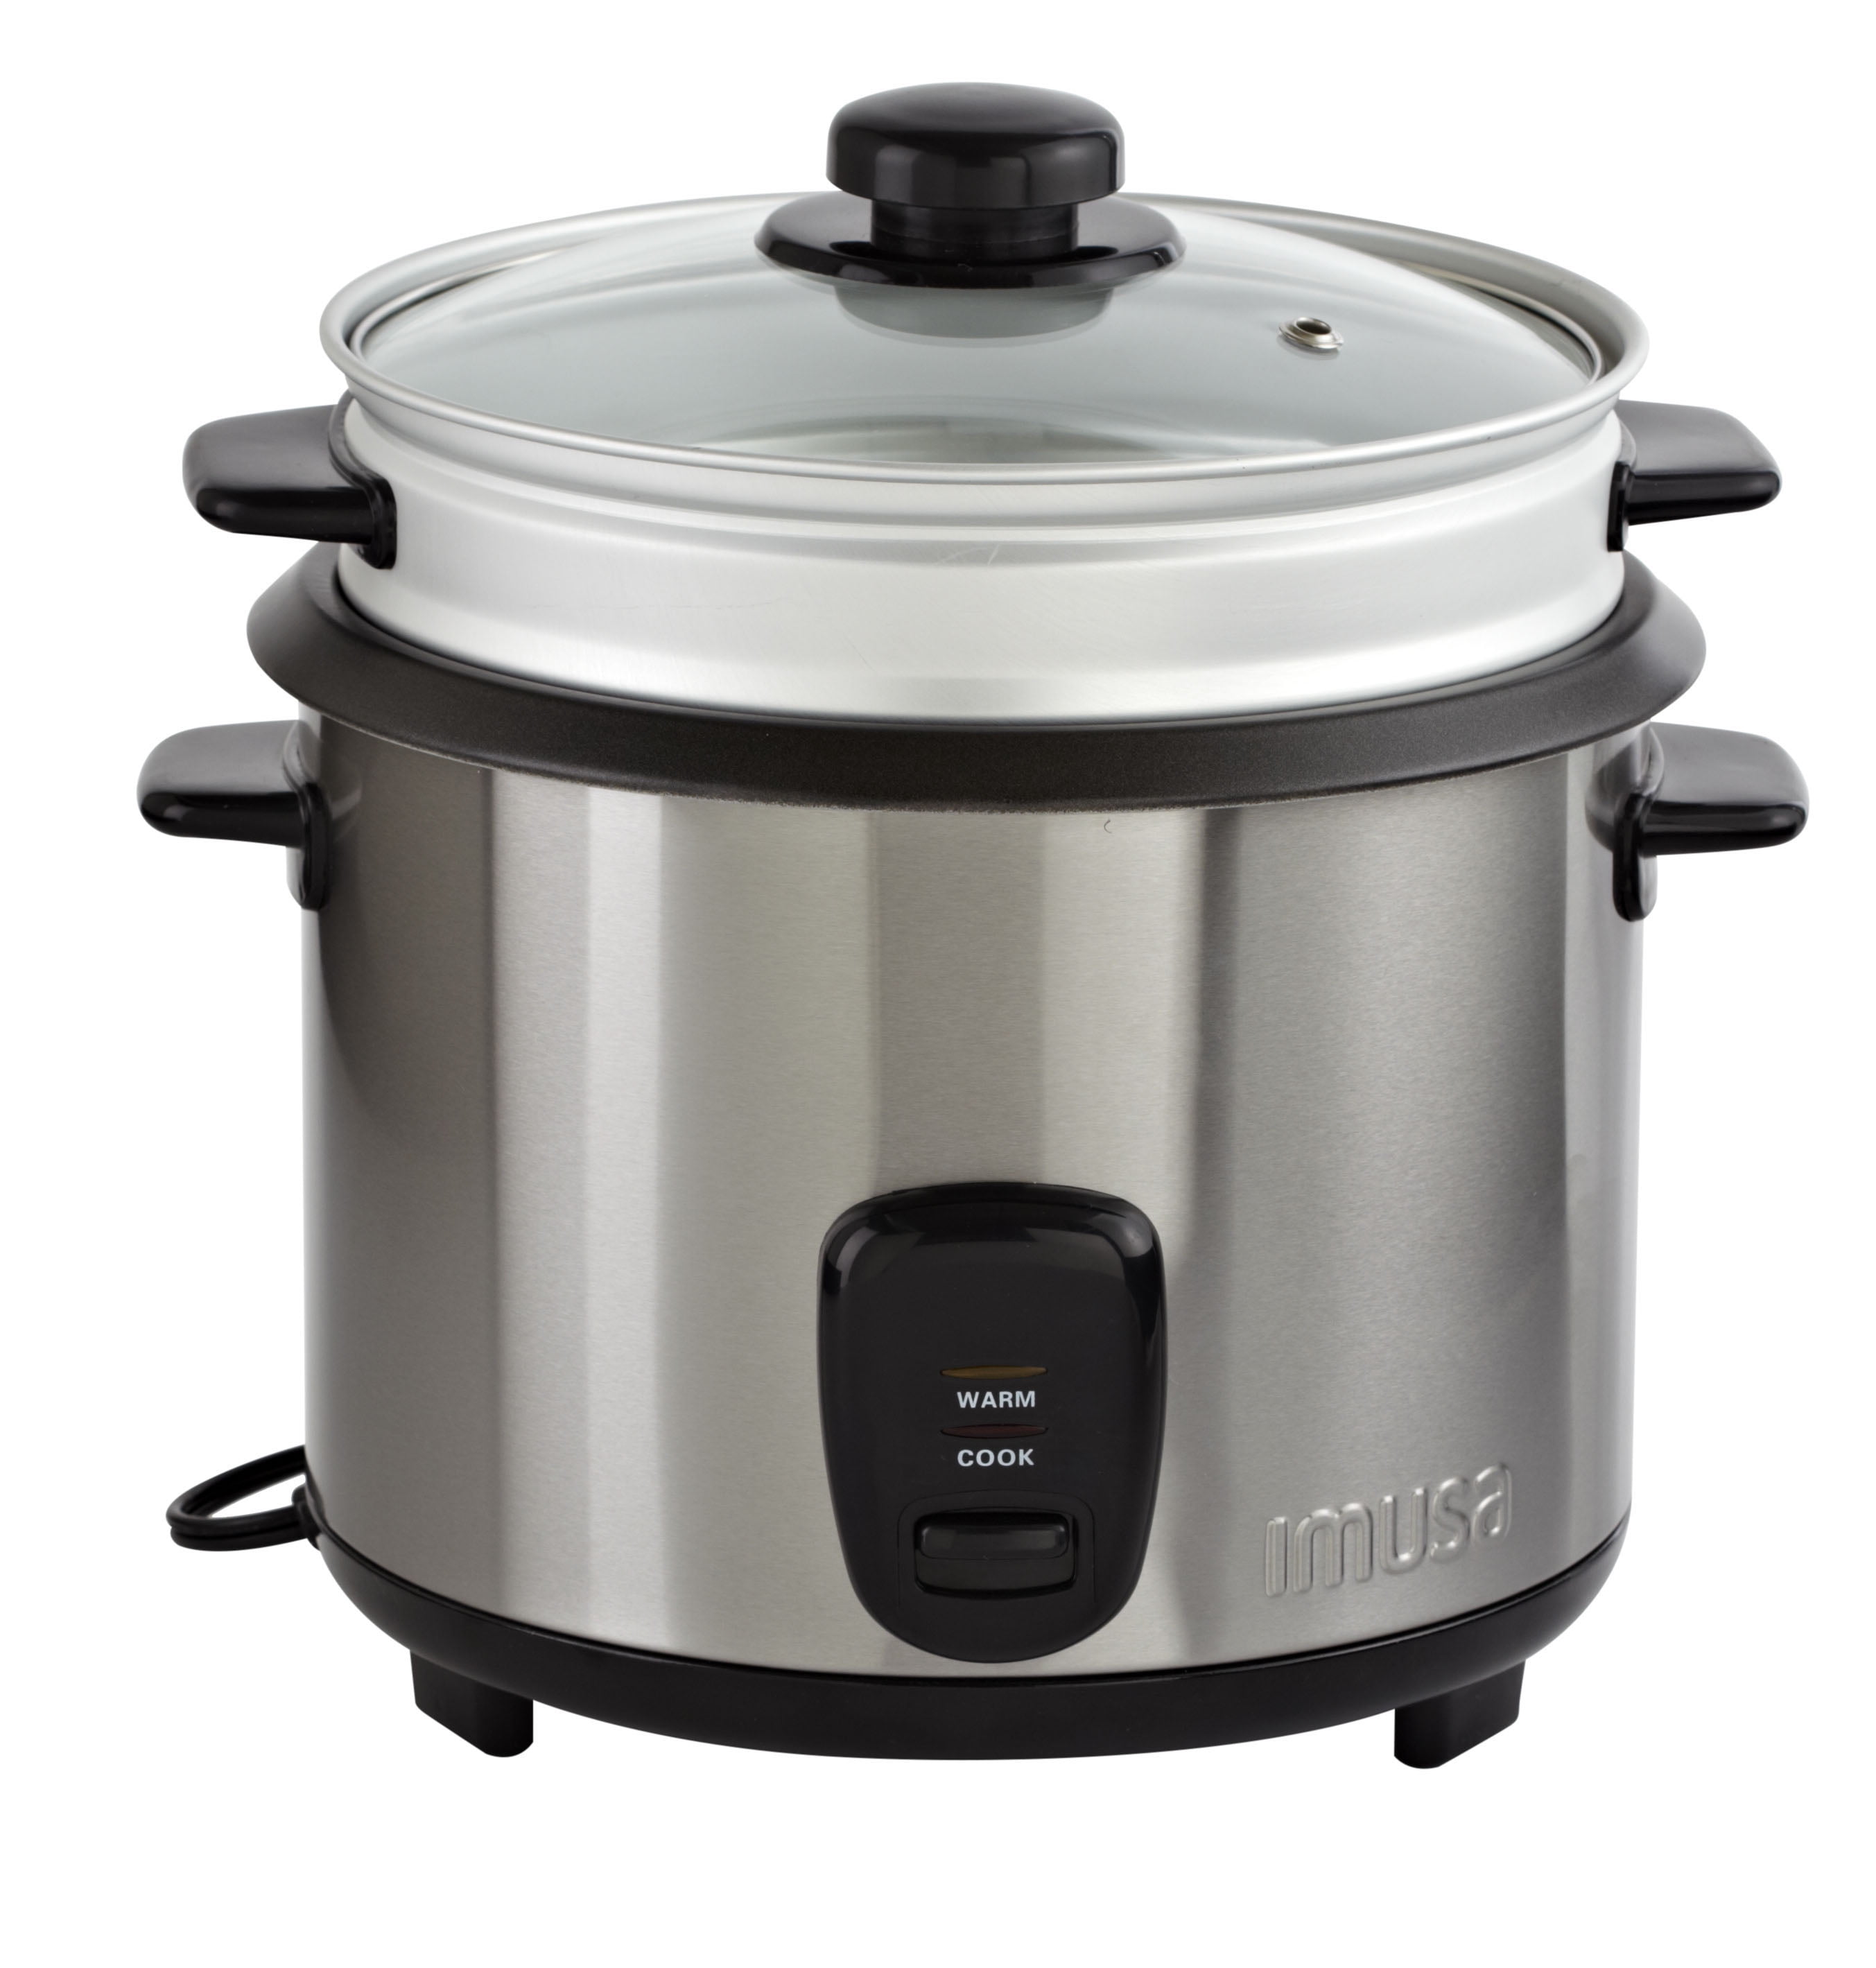 Maximatic Elite Cup Non Stick Rice Cooker with Steam Tray, 1 - Kroger